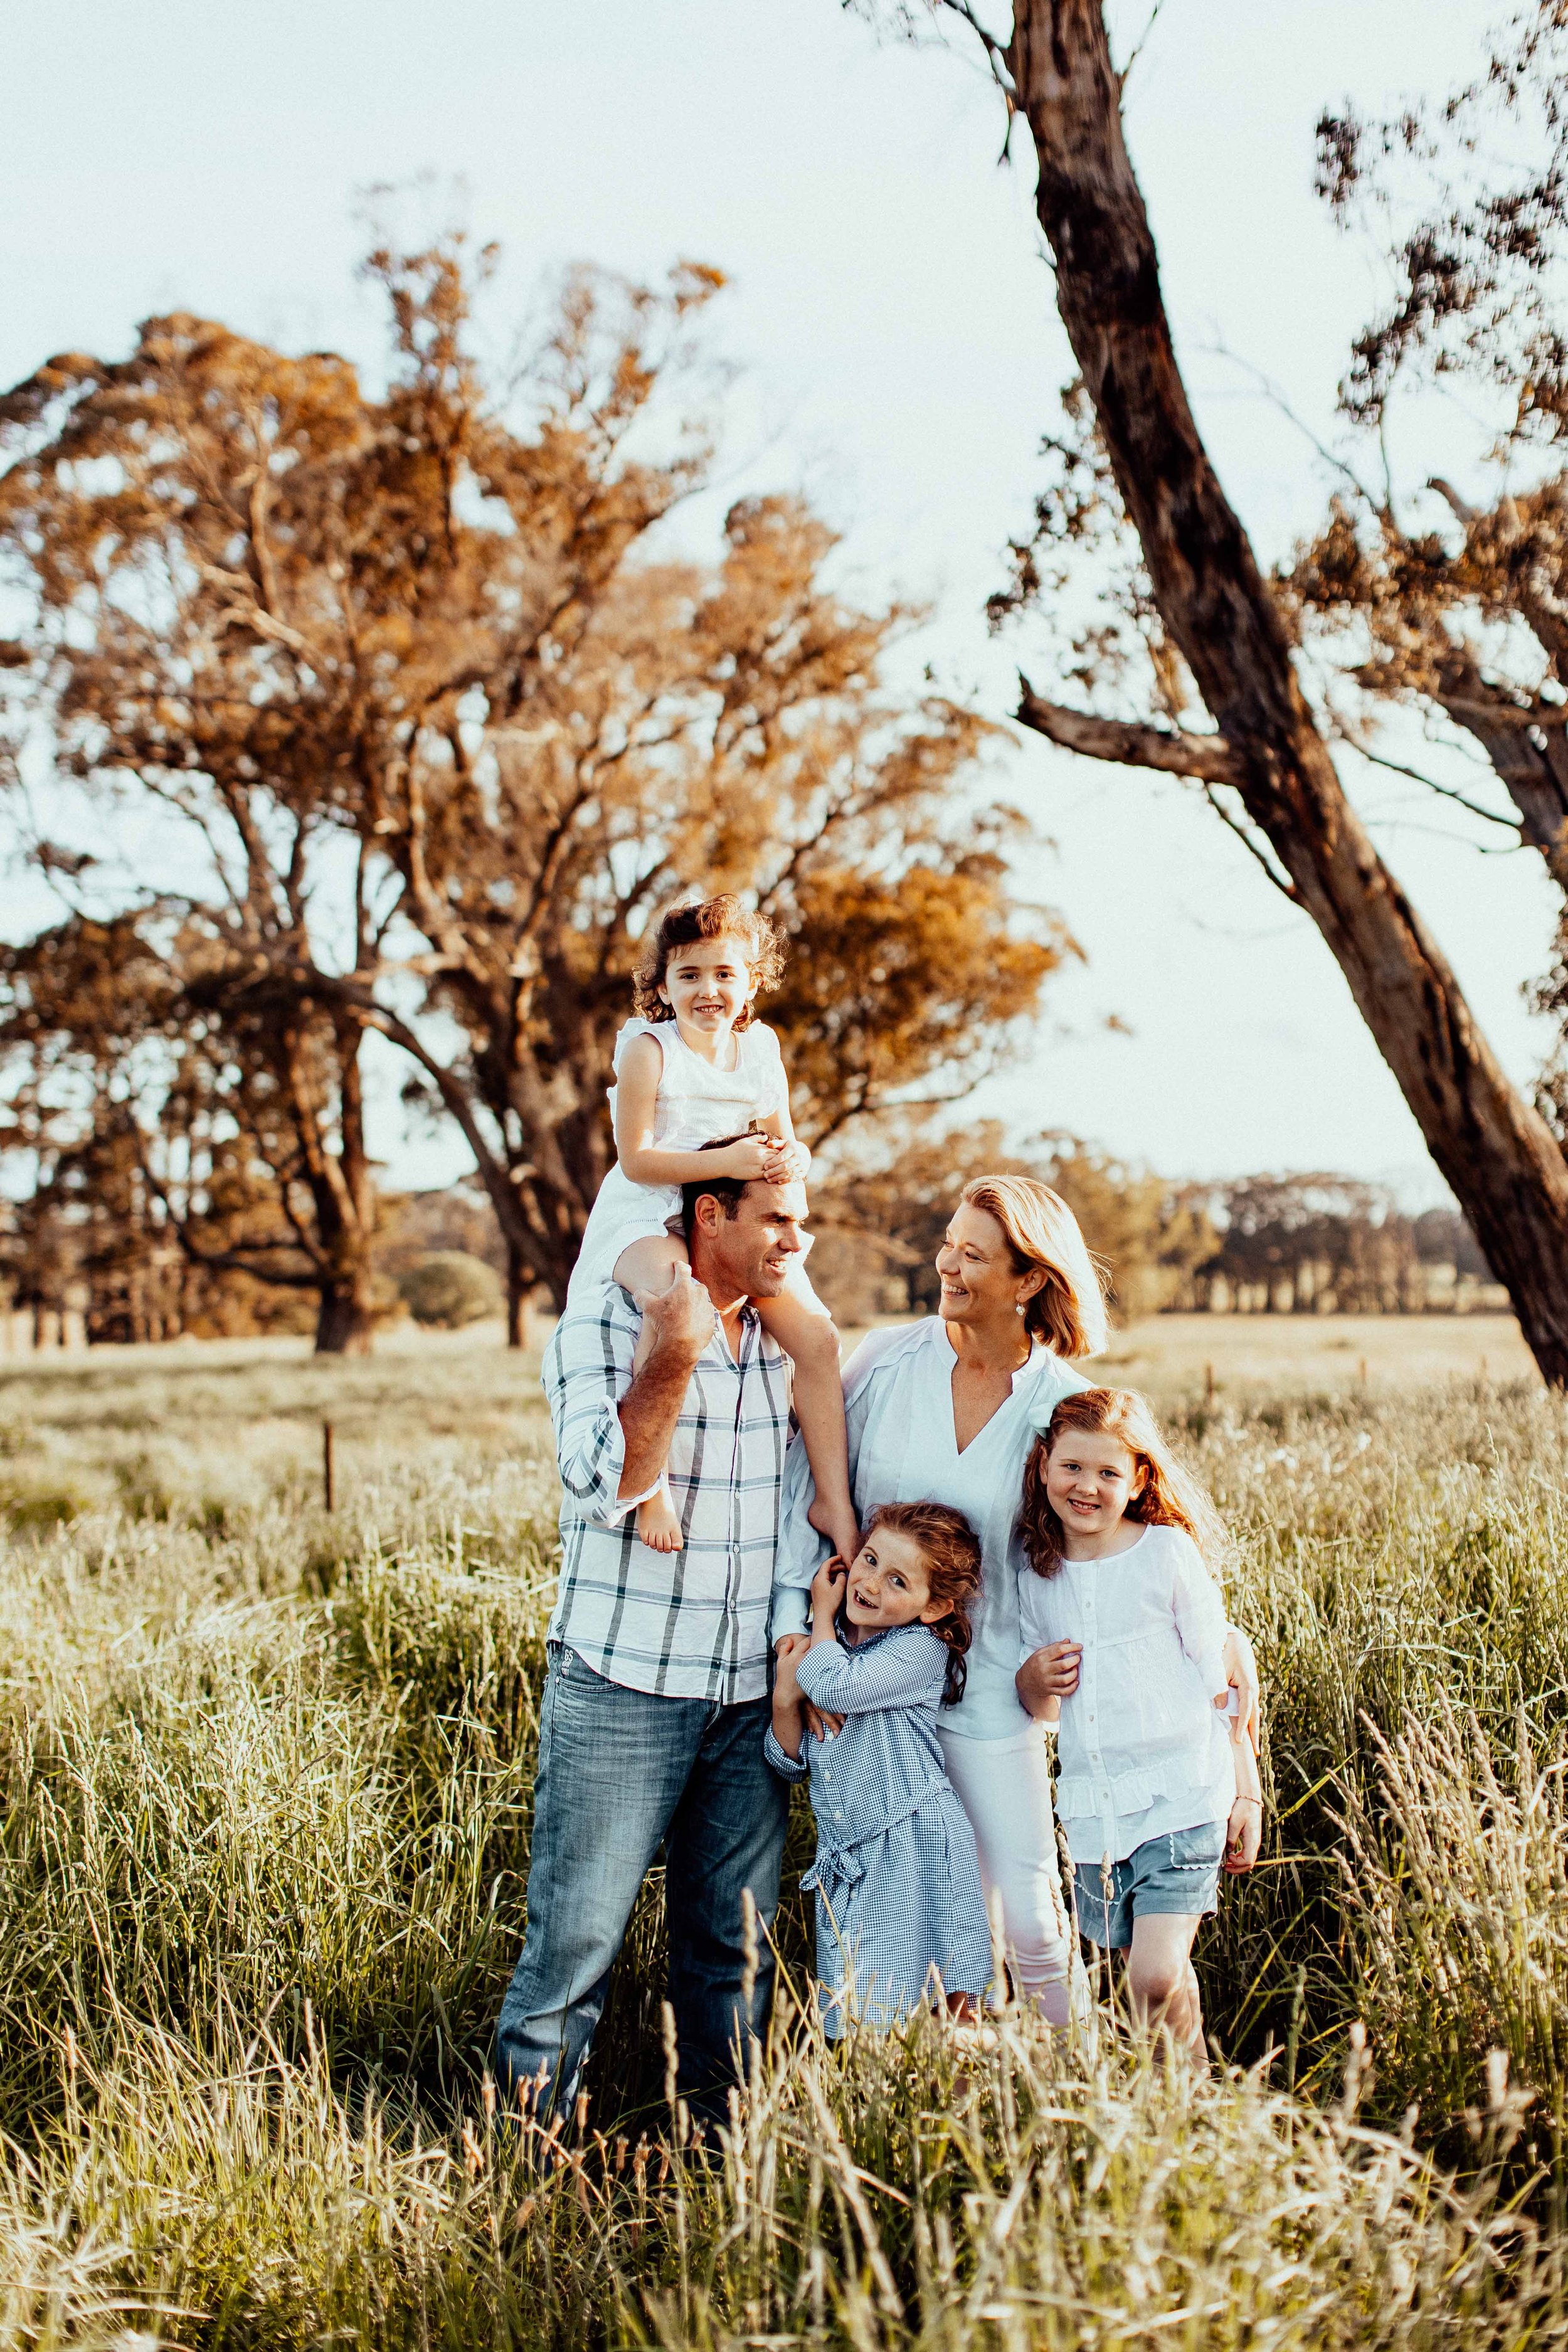 carroll-family-exeter-southern-hoghlands-inhome-family-lifestyle-wollondilly-camden-macarthur-sydney-photography-www.emilyobrienphotography.net-54.jpg